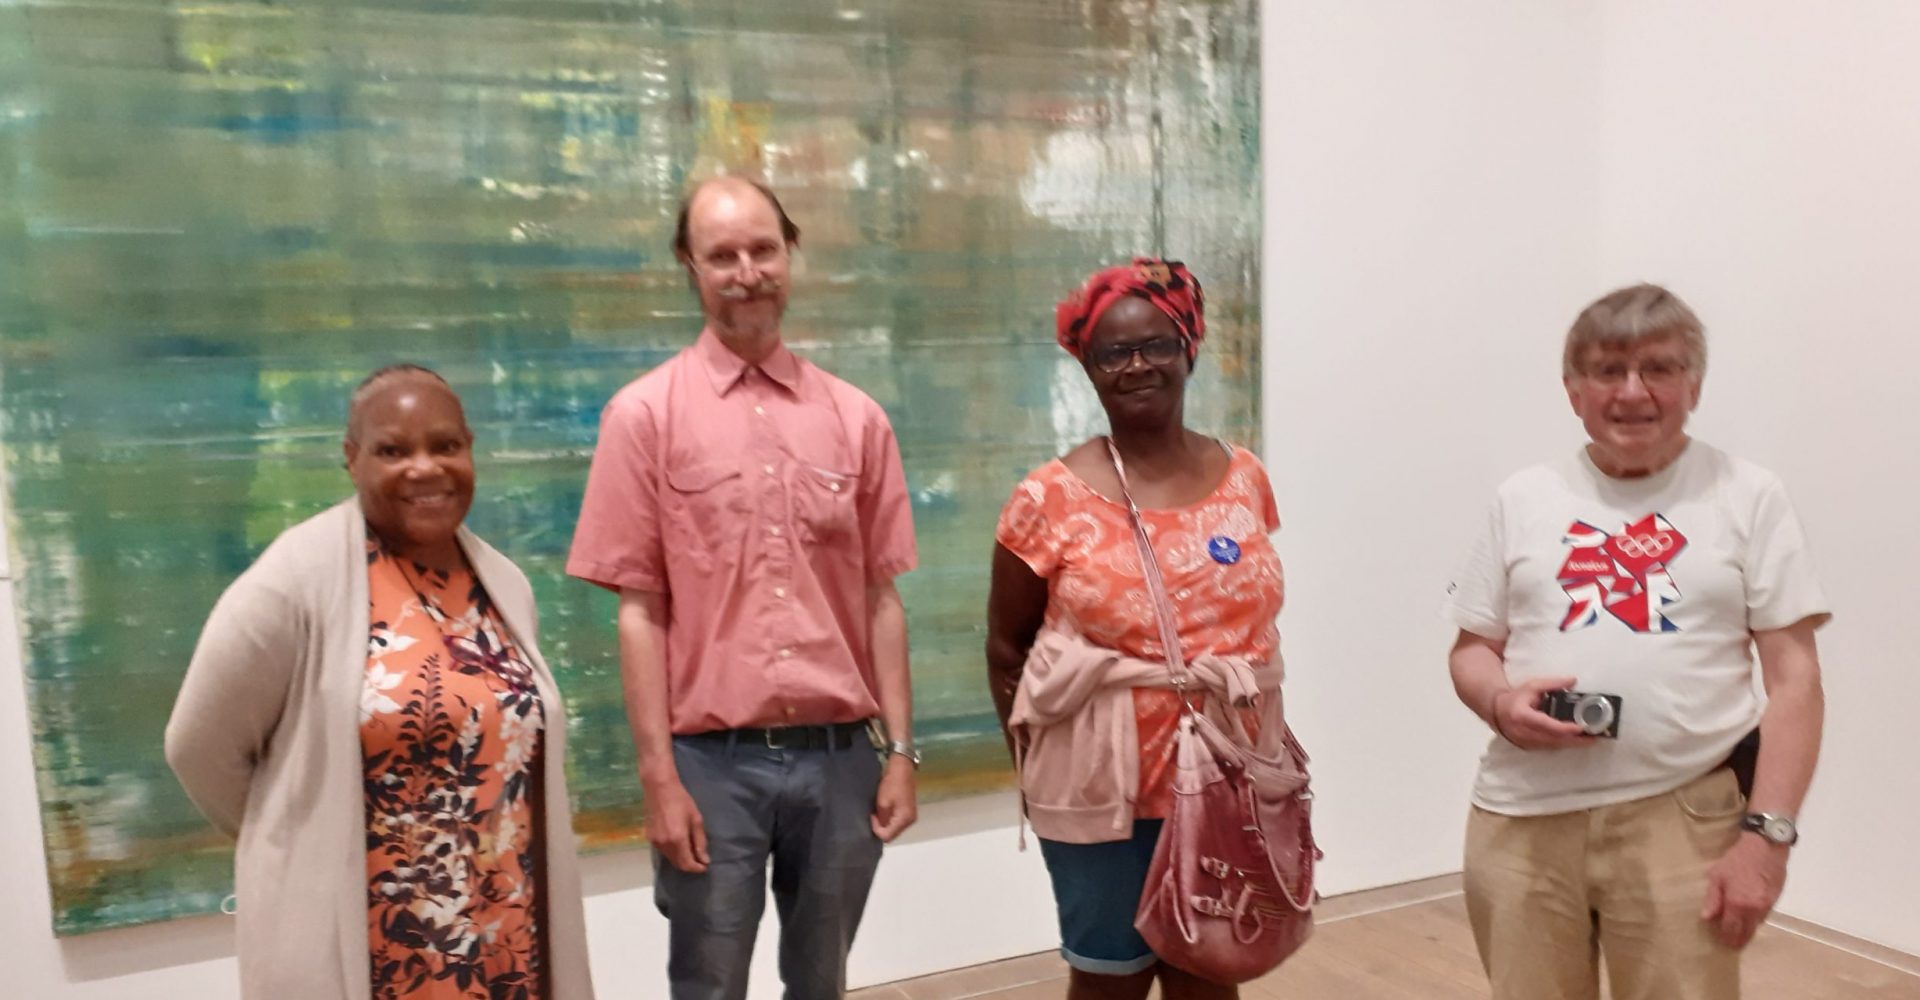 Four people in front of a painting at the Tate Moderni